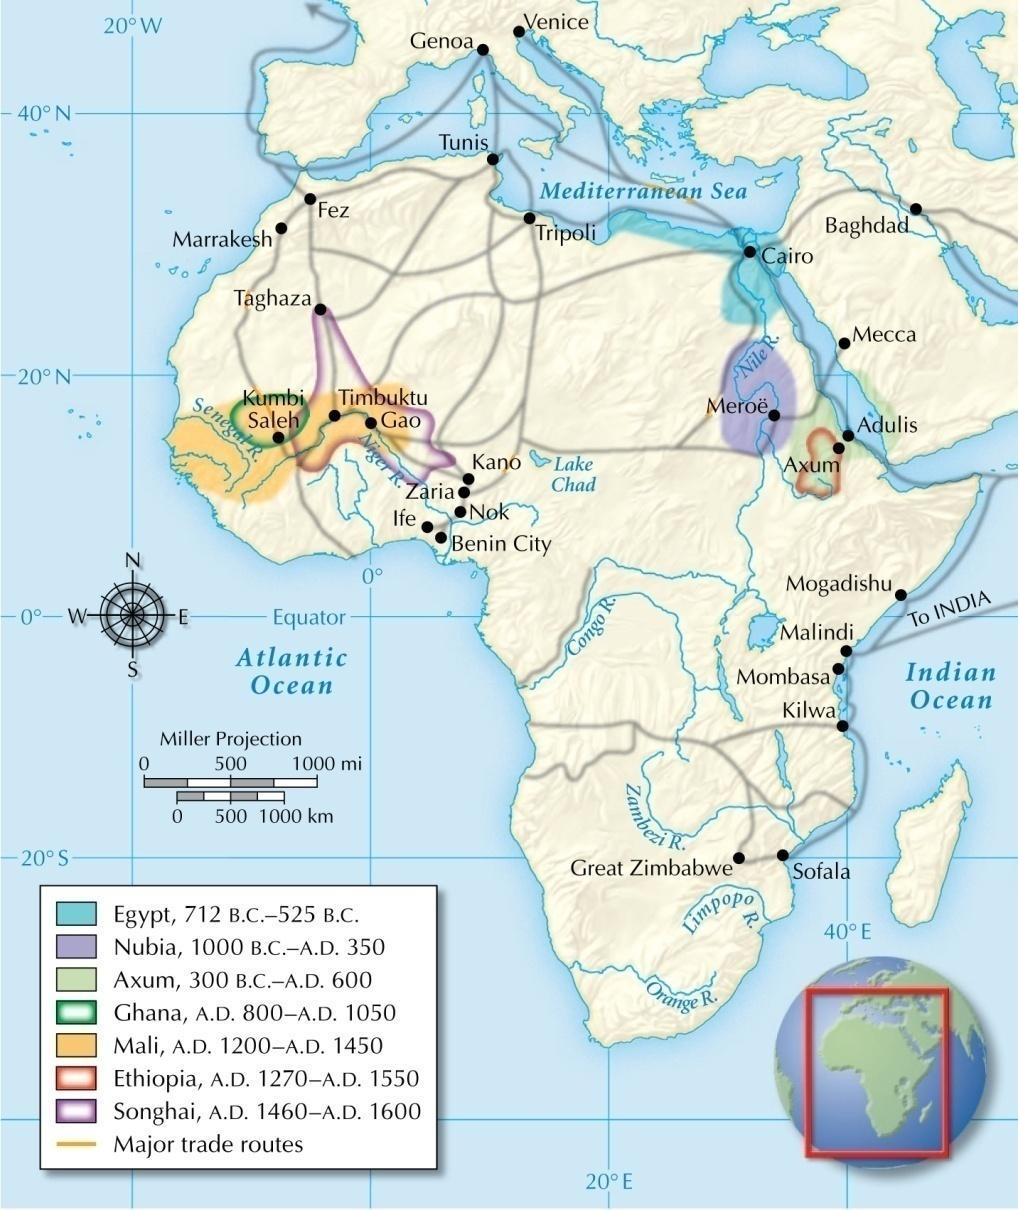 Trade networks also linked the Middle East and West Africa.